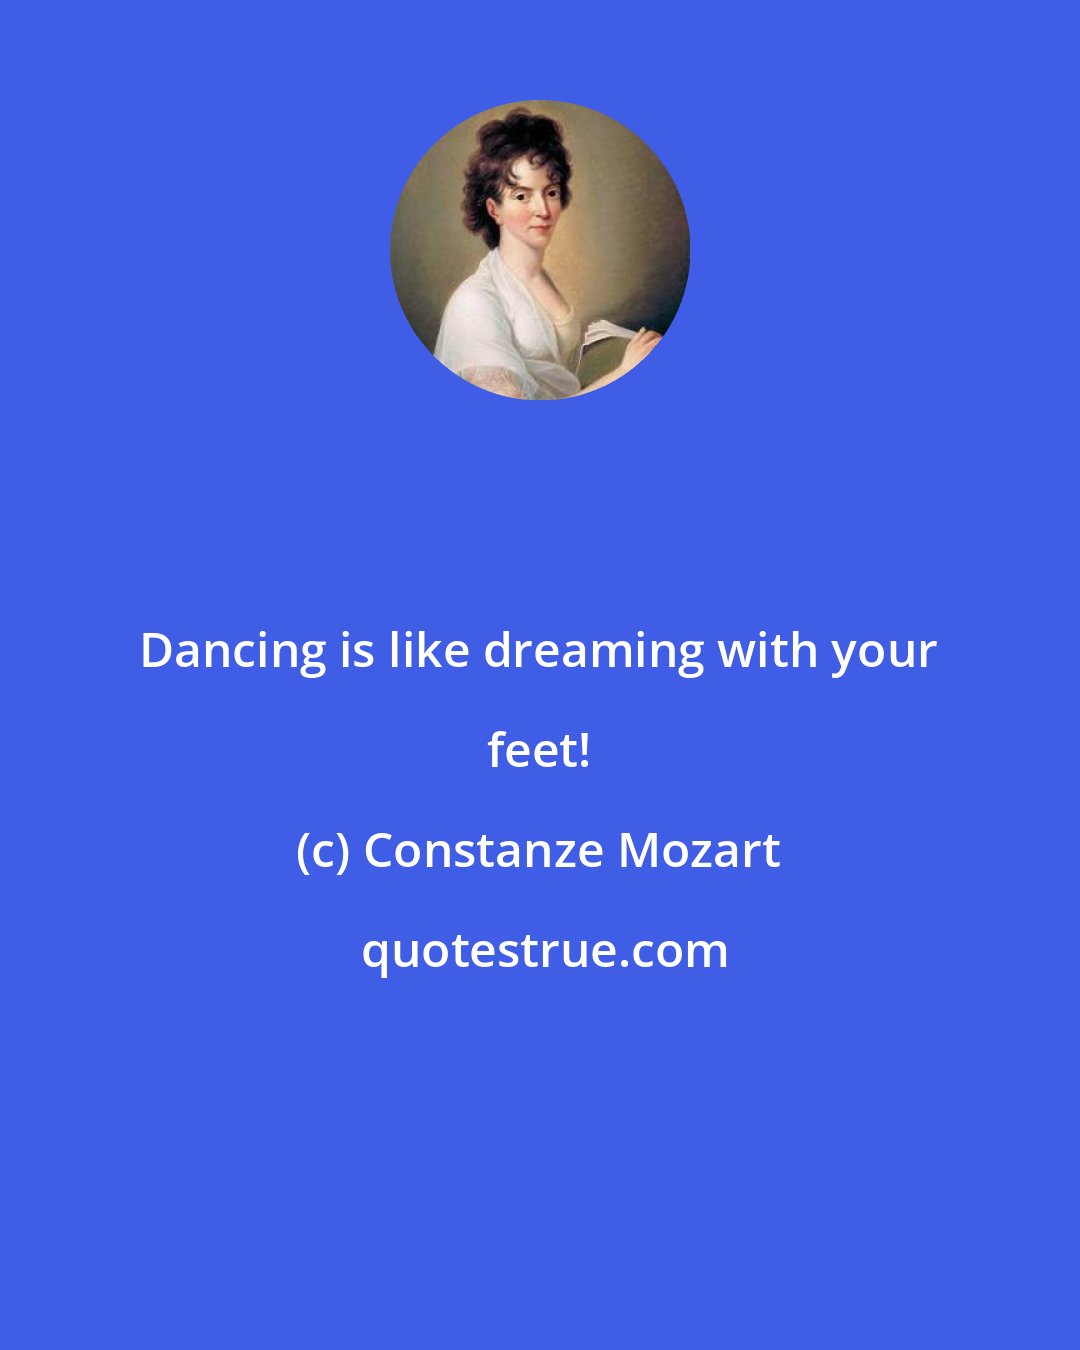 Constanze Mozart: Dancing is like dreaming with your feet!